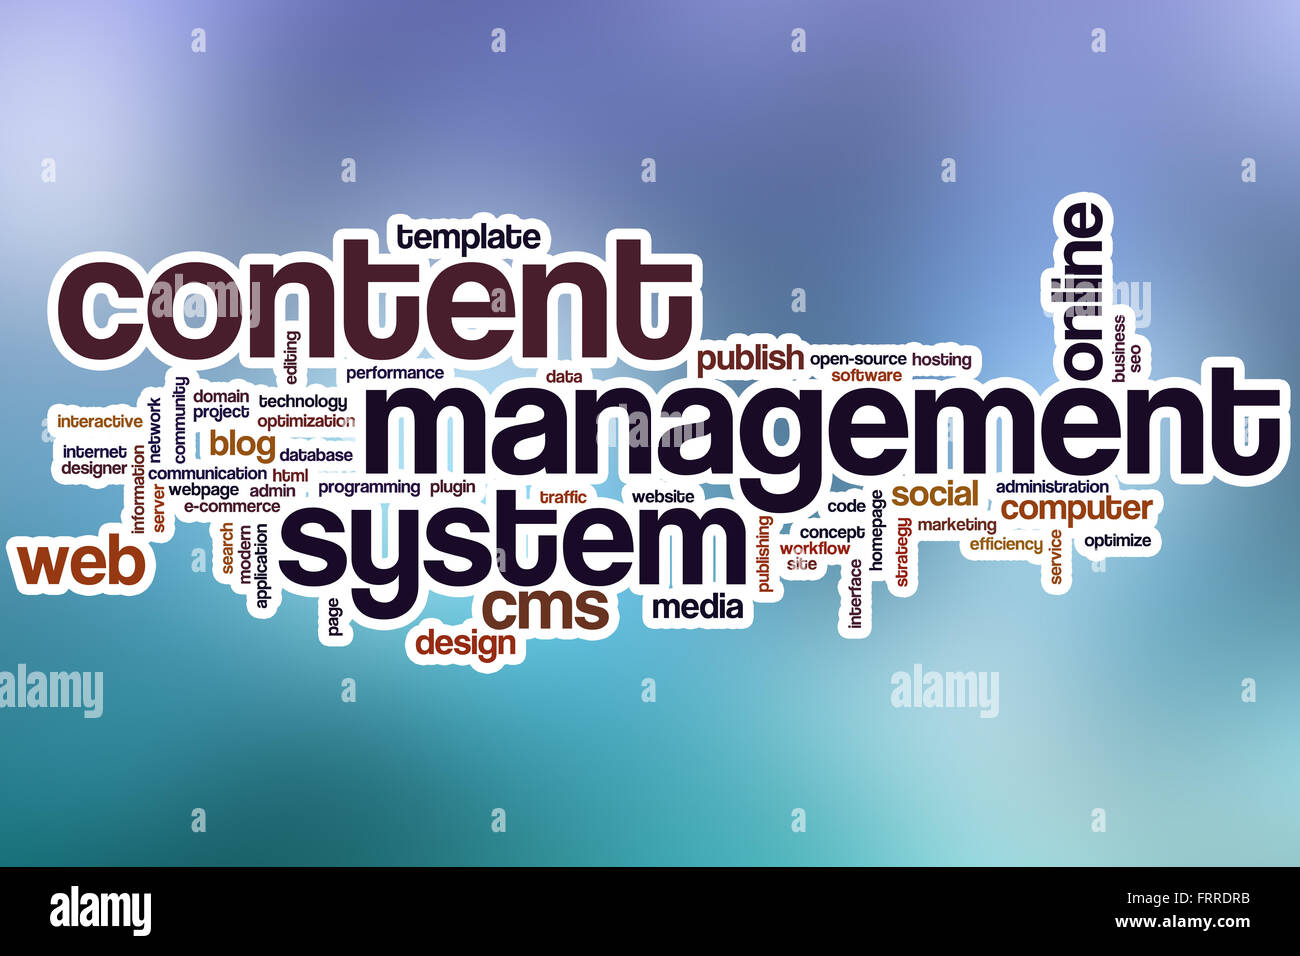 Content management system word cloud concept with abstract background Stock Photo